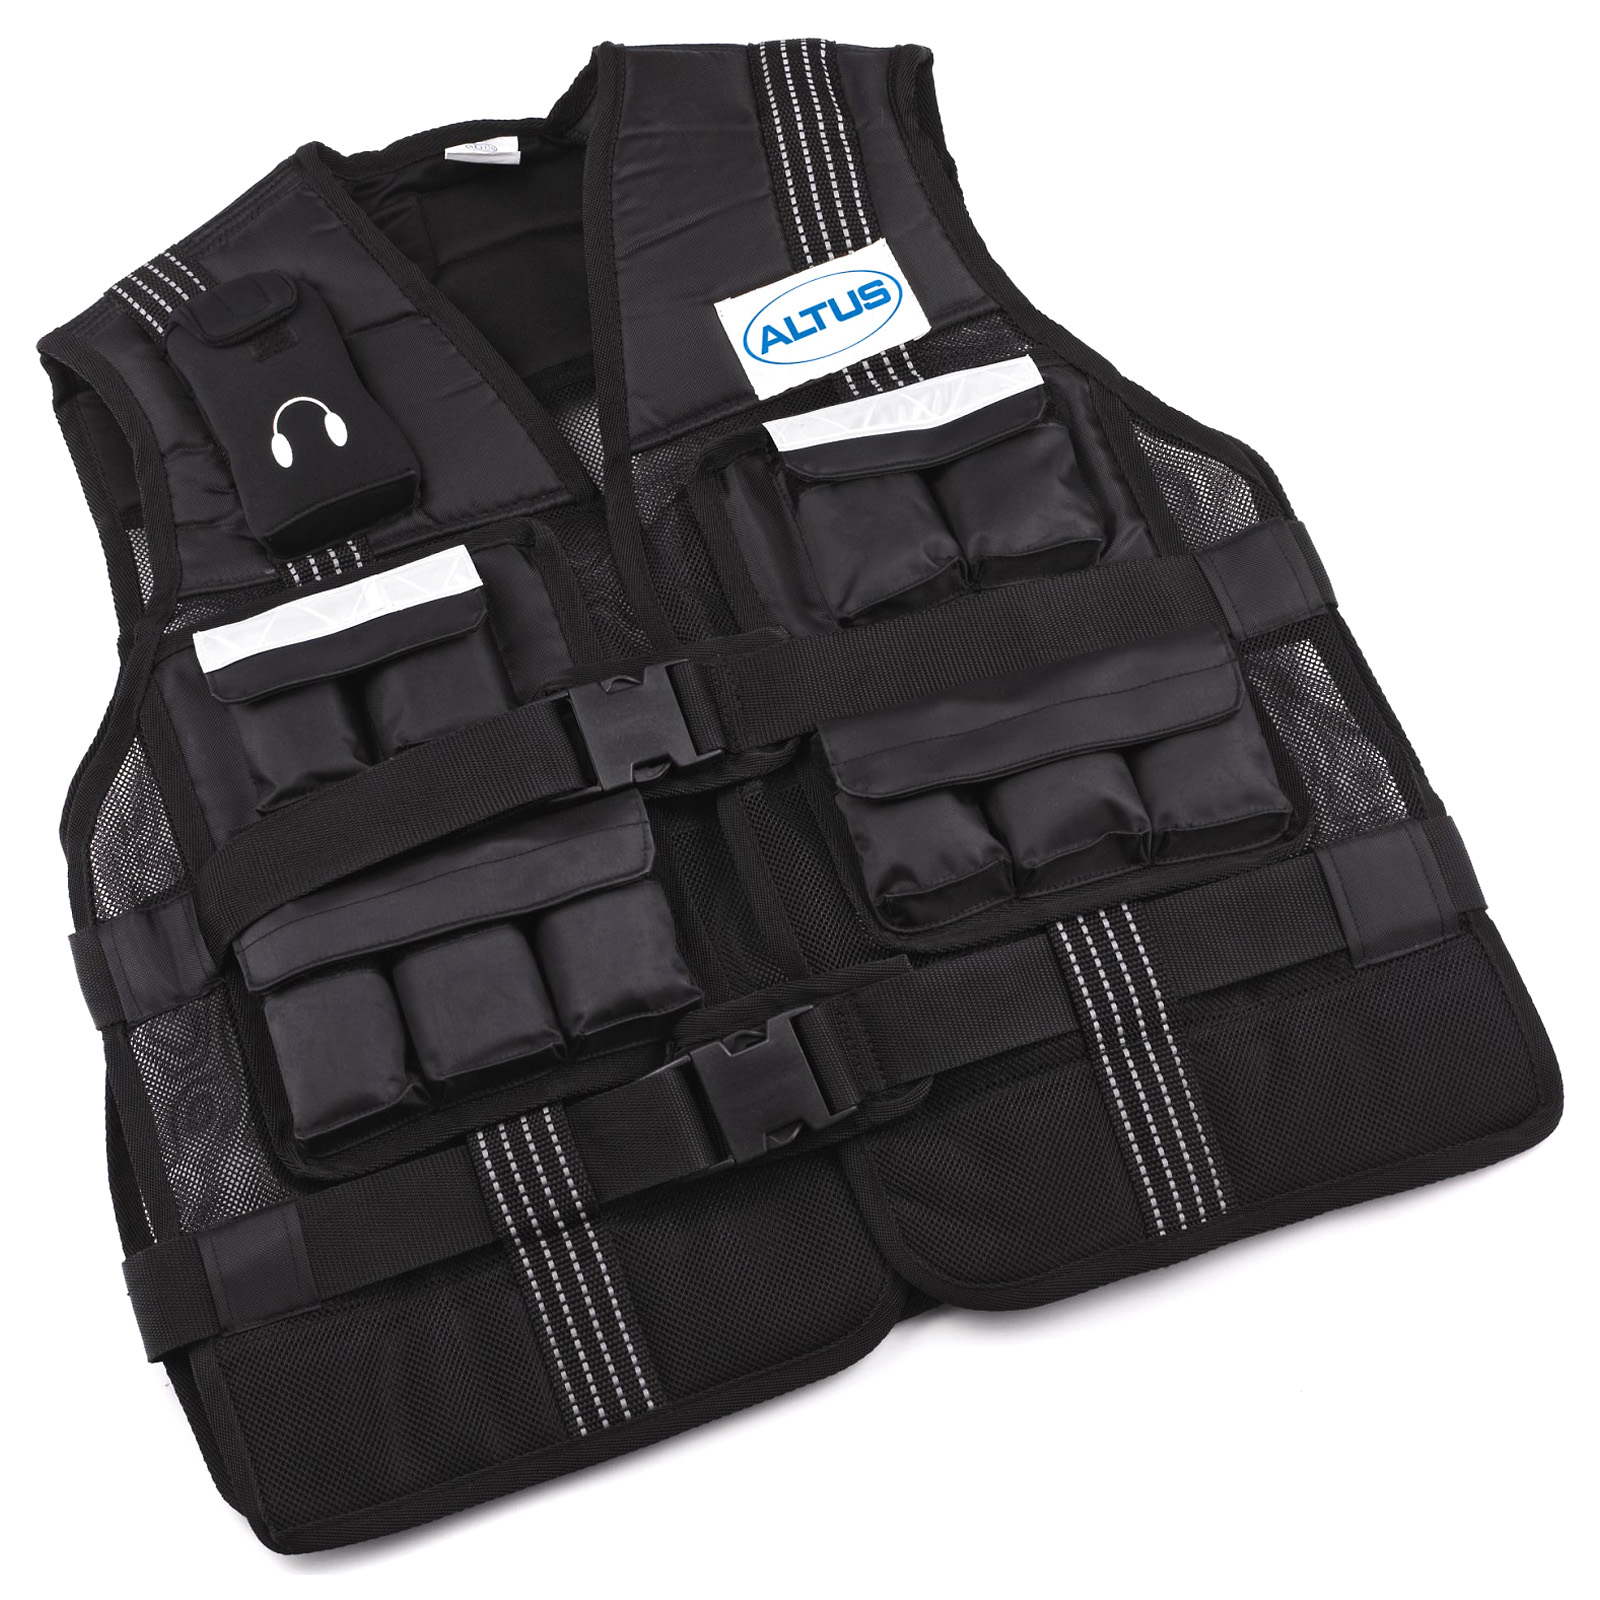 20 lb. Weighted Vest